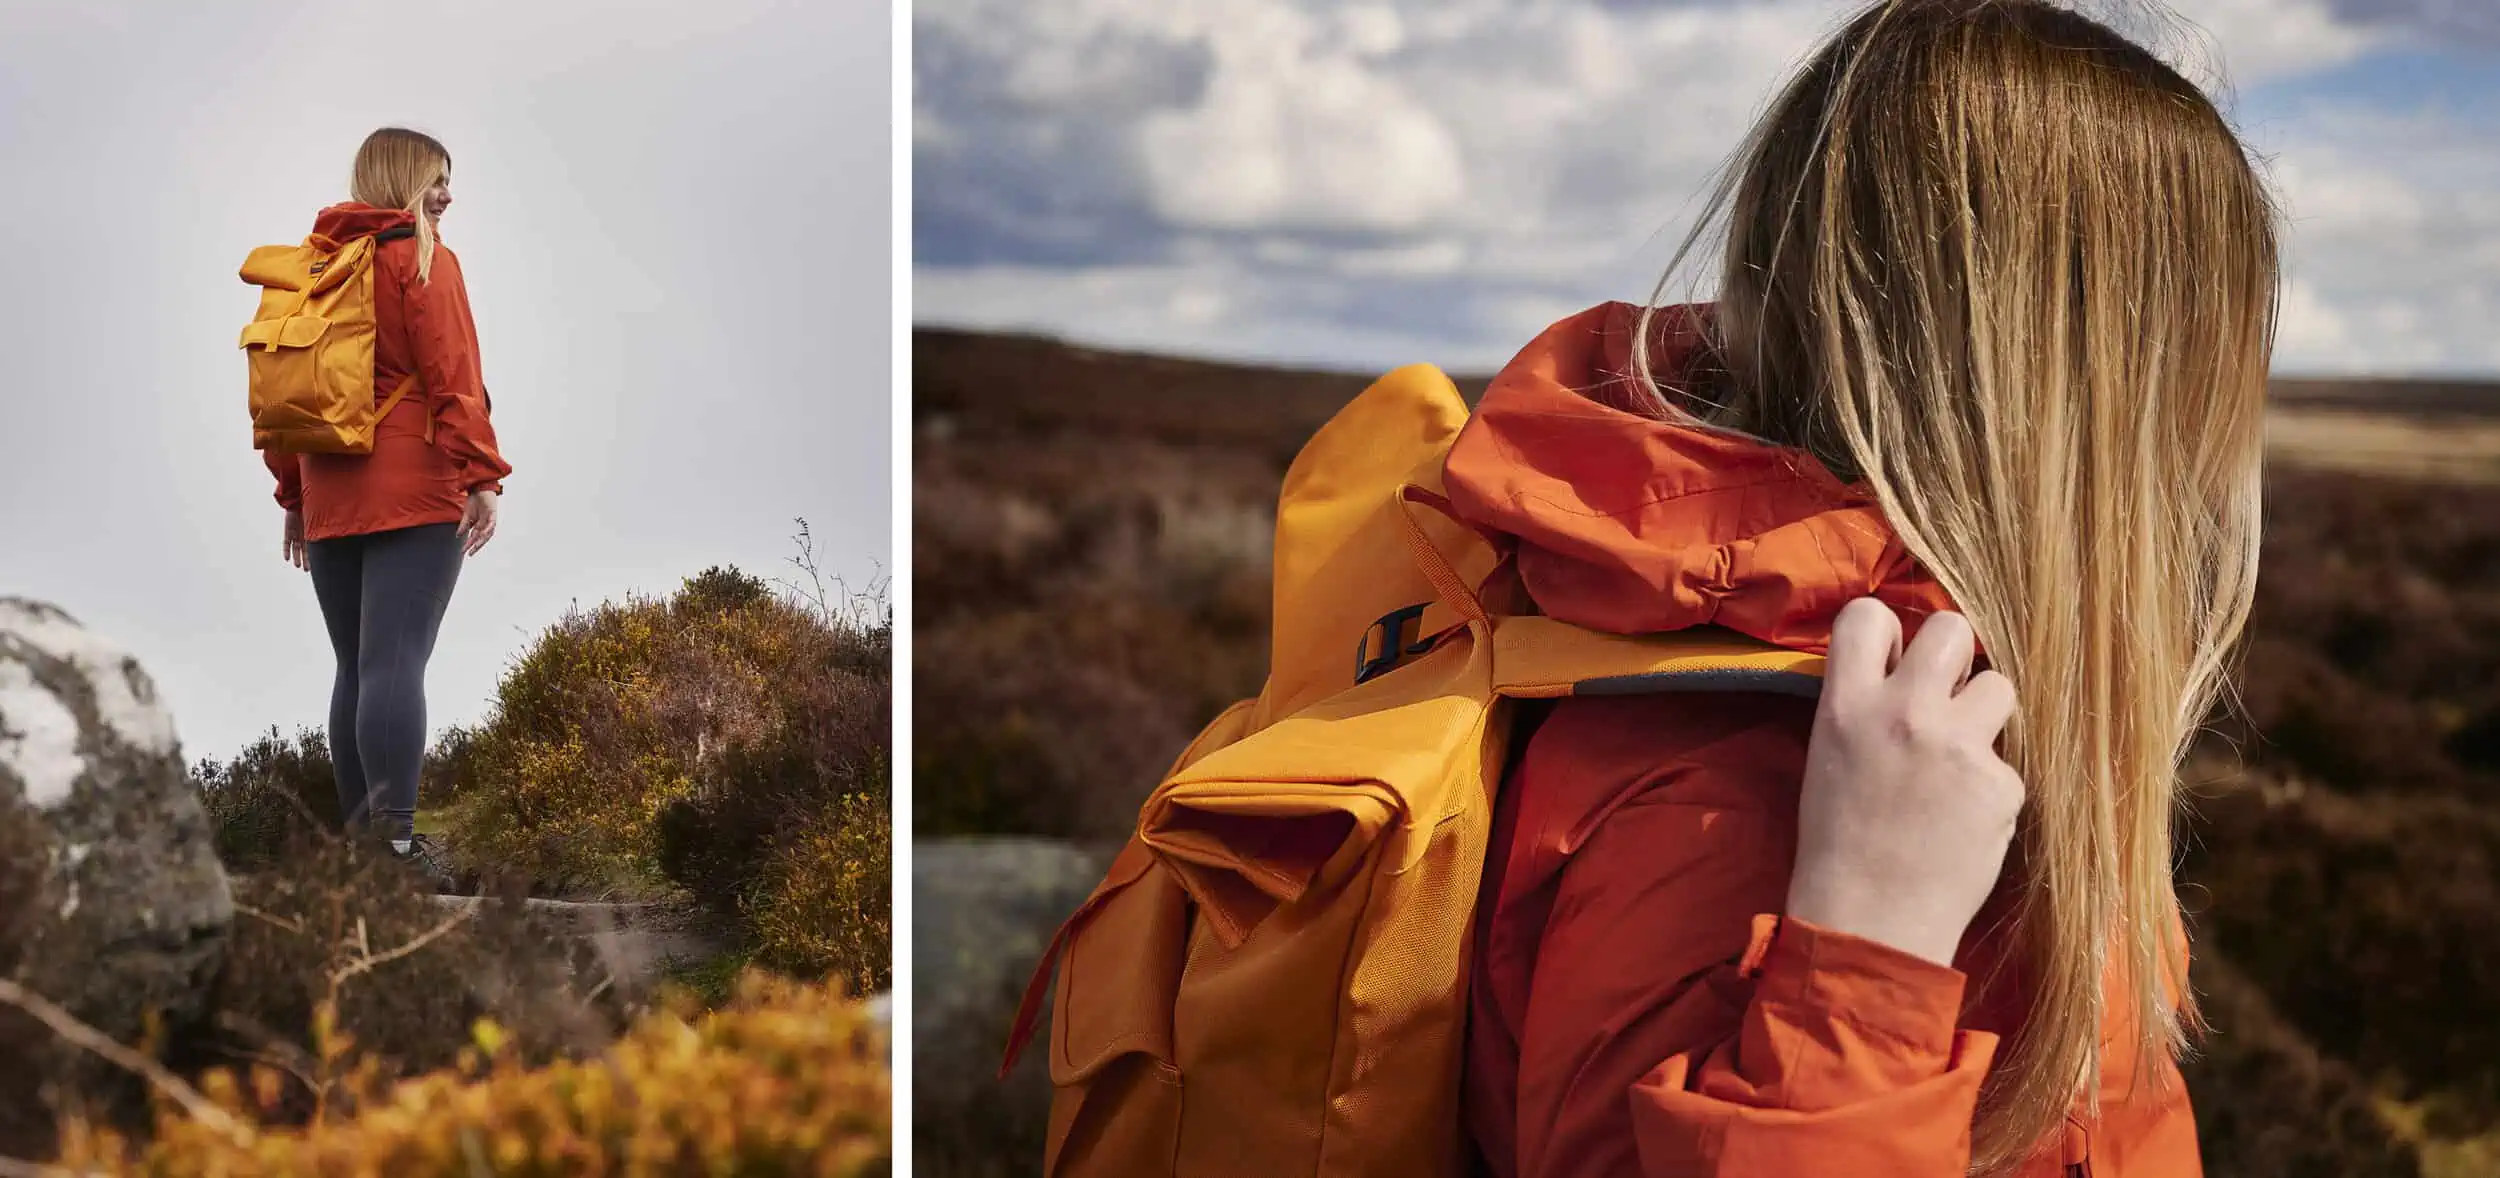 Image description: From left to right – 01: A portrait image. Fay stands with black to camera but with head twisted so we see the right-hand side. Fay wears grey trousers, a bright red raincoat, and a Millican Core Roll 20l pack in Sunset. In the foreground are out of focus rocks and some orange/yellow flowers. The sky is dark without much detail. 02: A landscape image. A detail of Fay putting on a Millican Core Roll 20l pack in Sunset. We see Fay’s arms and shoulders and is wearing a bright red raincoat. In the background is a grassy hull with a cloudy blue sky.&nbsp;